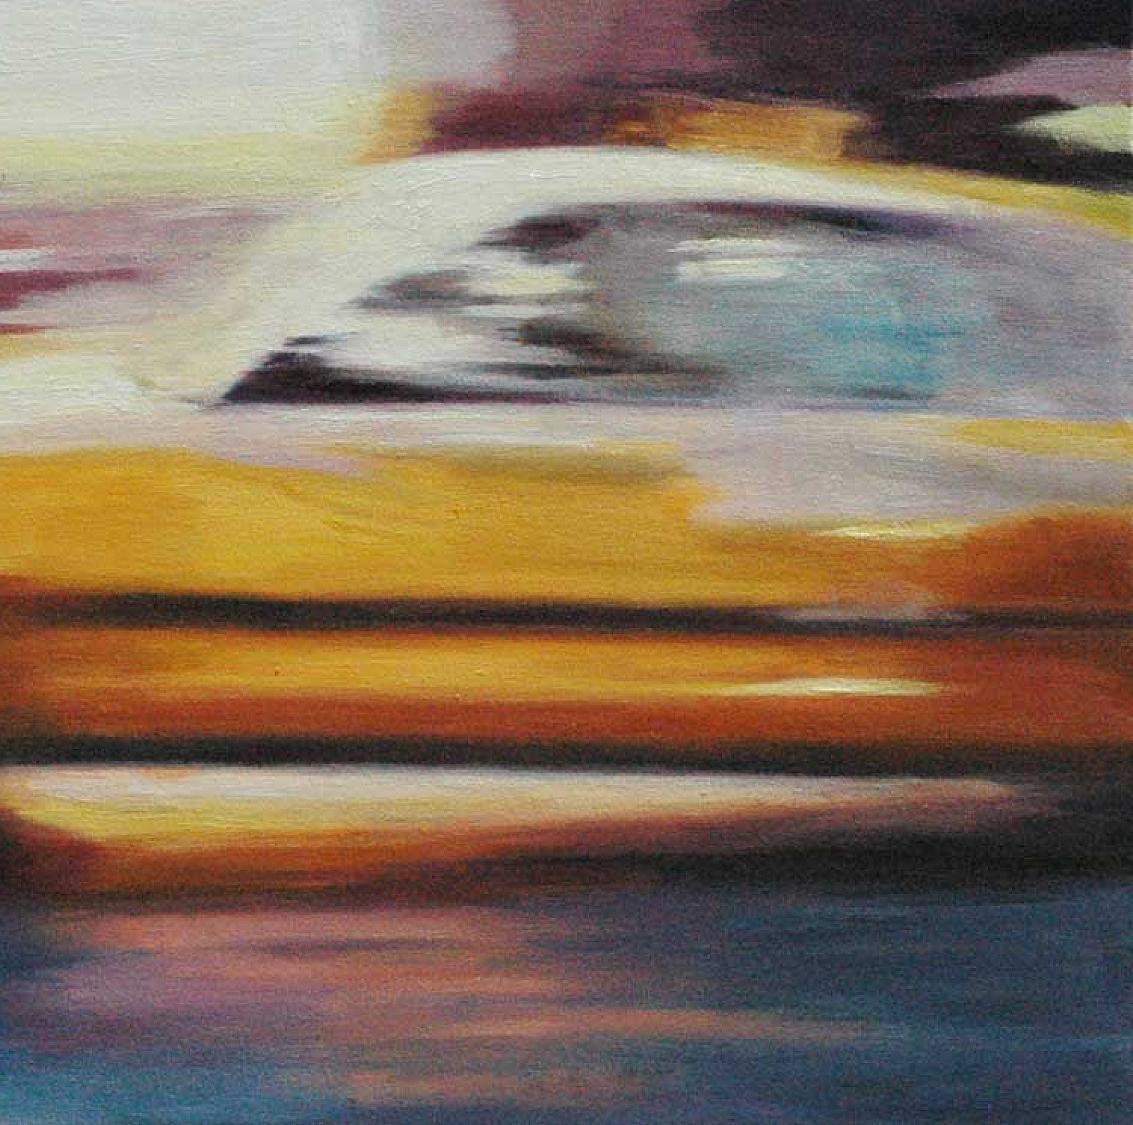 New York City Taxi is an oil painting in the style of Contemporary Abstract Impressionism .  This painting was done from the artist' trip to NYC  several years ago.  It started as a sketch and developed into this 30 x 30 oil painting.
Joan